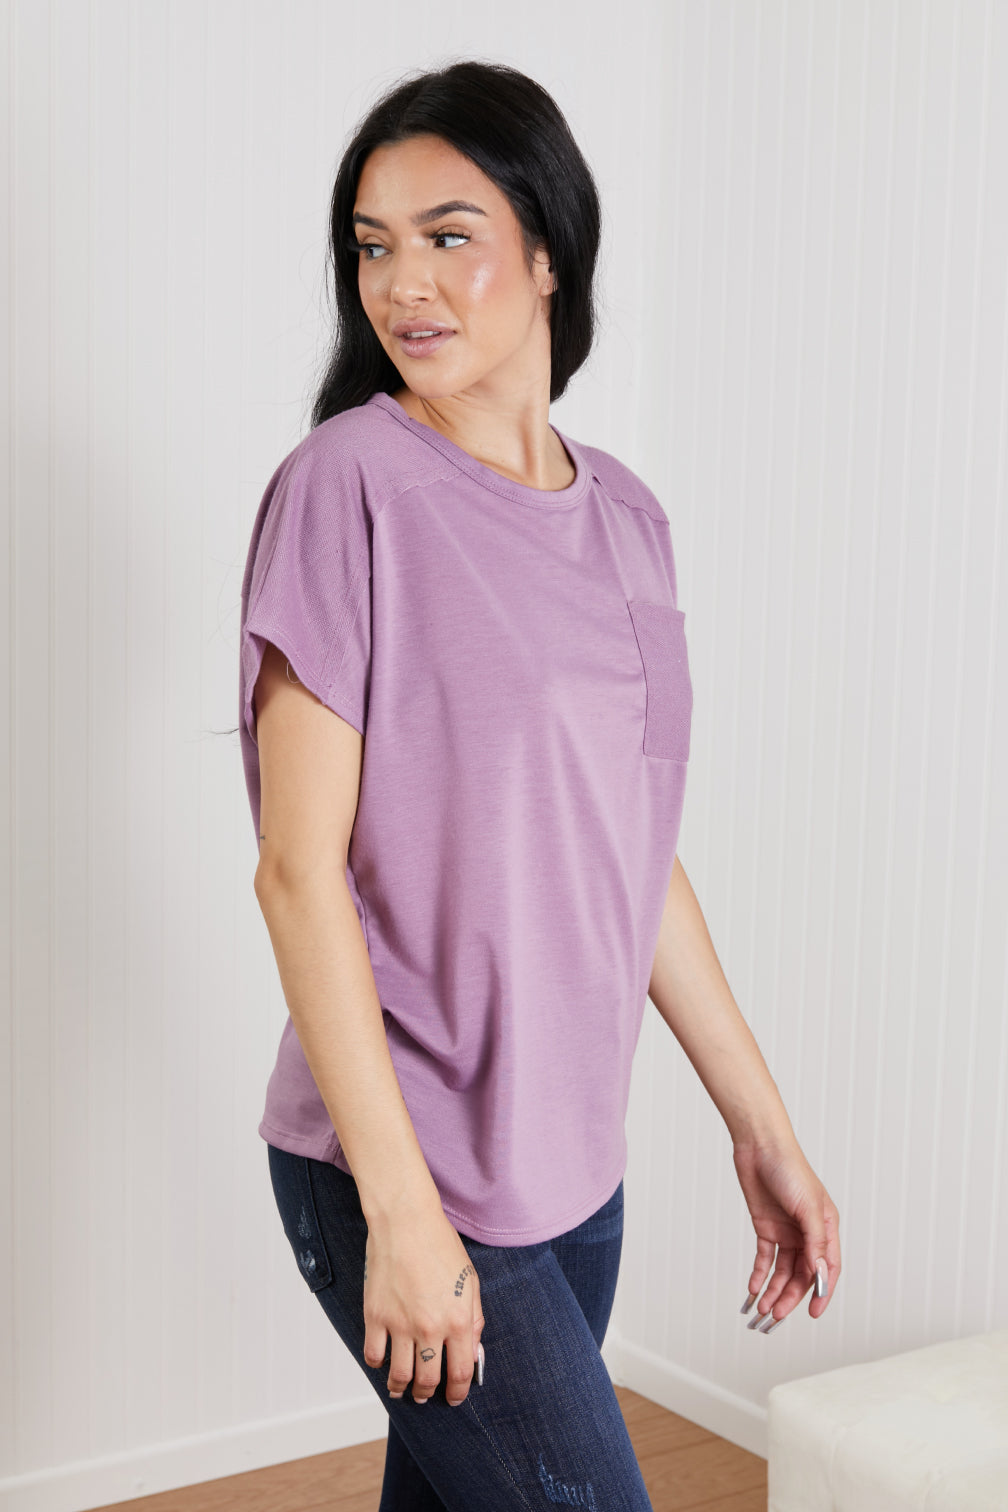 Sew In Love Stay and Chat Love Full Size Pocket Tee in Plum